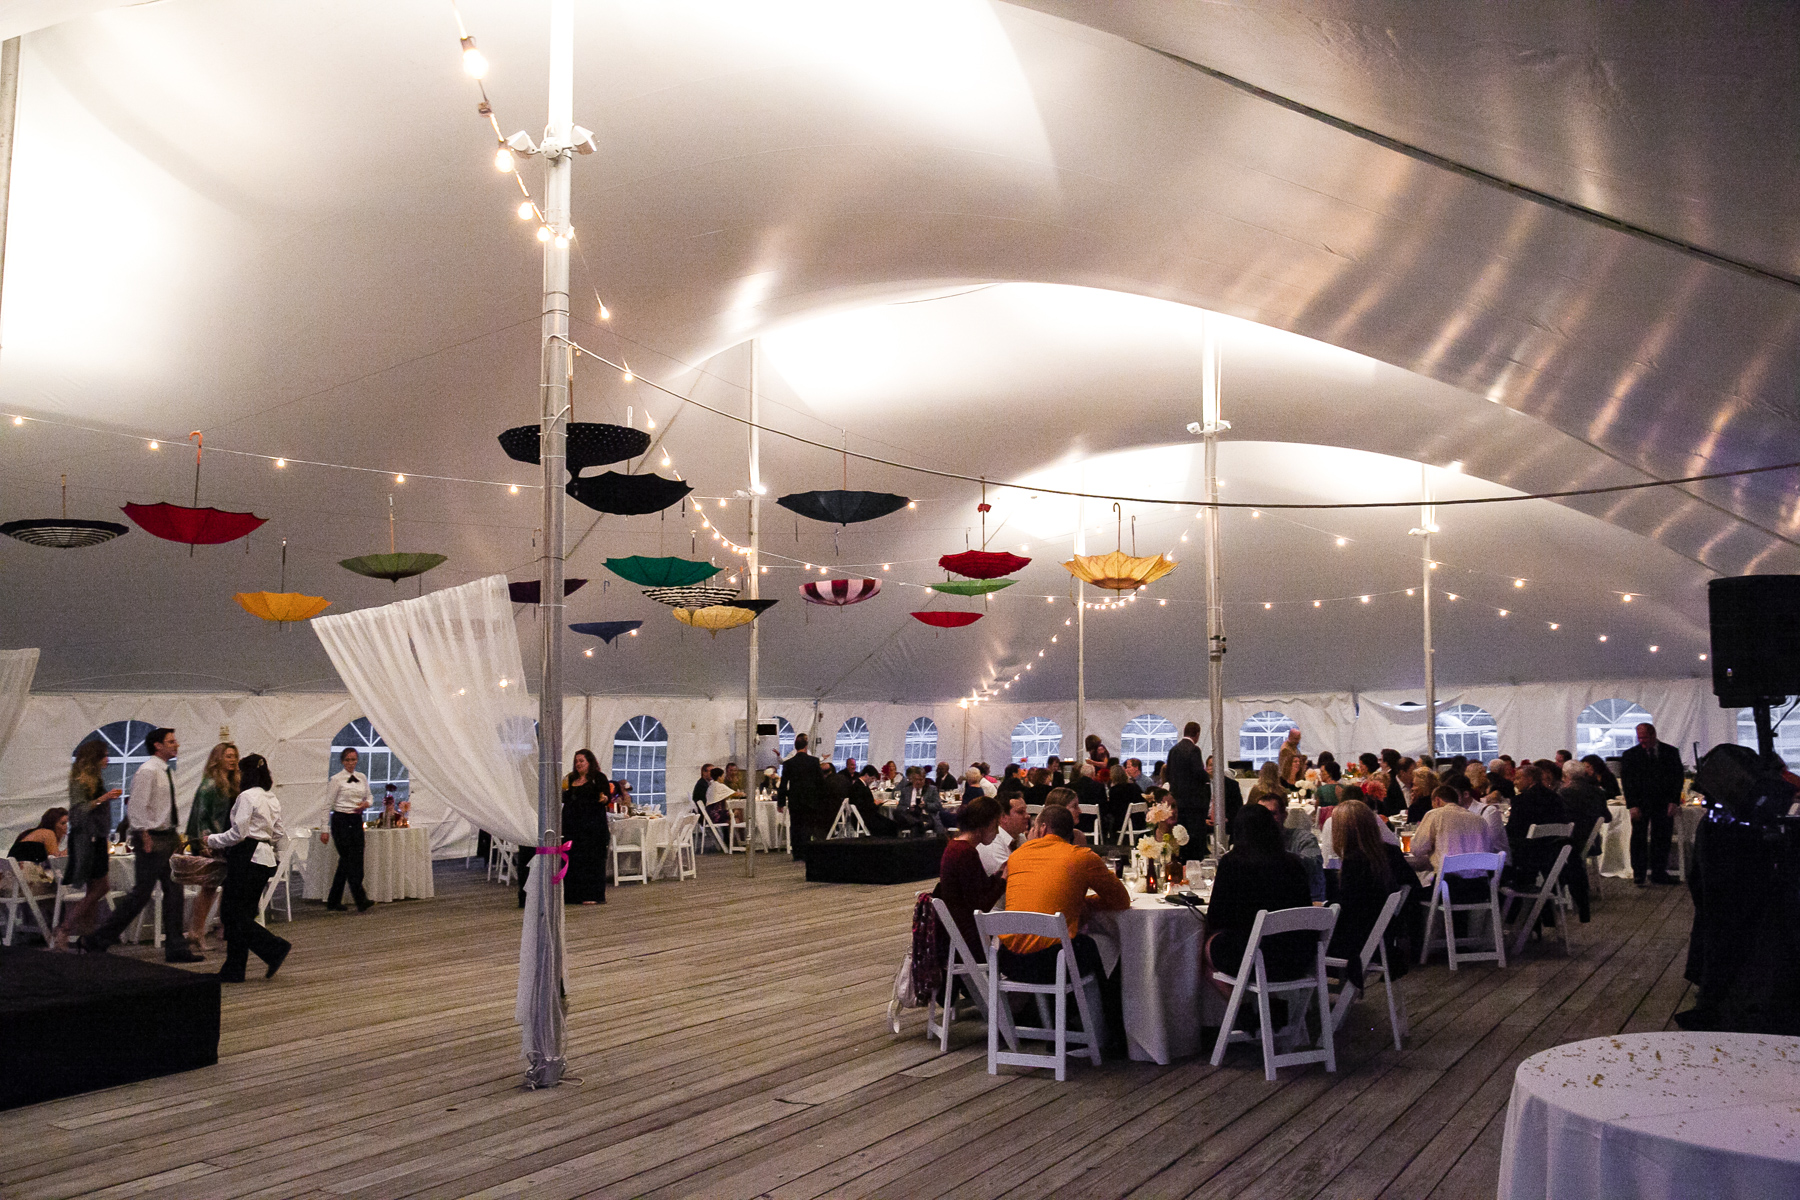 The reception tent decorated with vintage umbrellas and cafe lights, creating a romantic ambiance